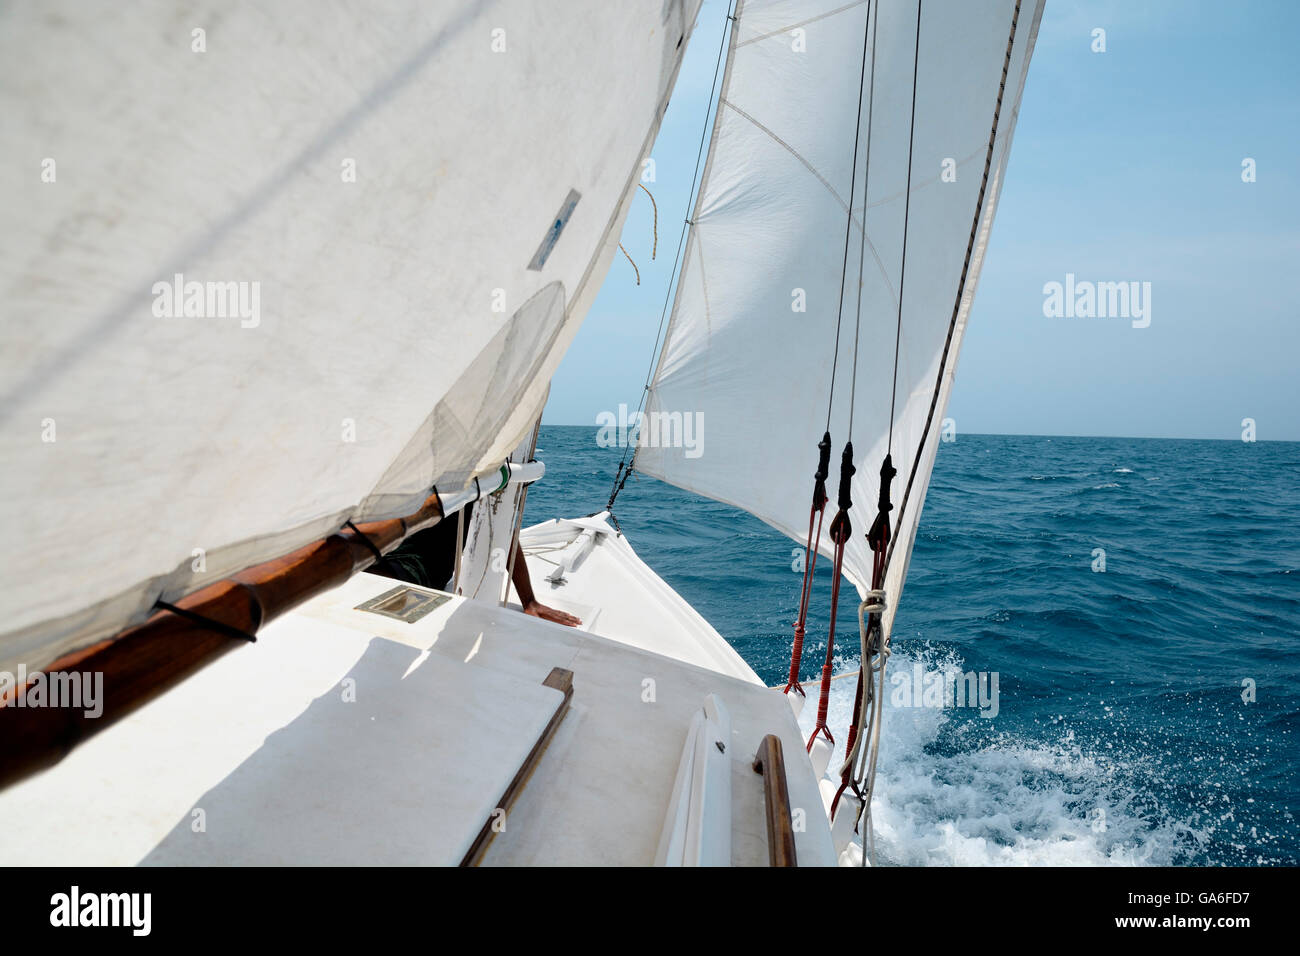 View from the deck of a sailboat Stock Photo